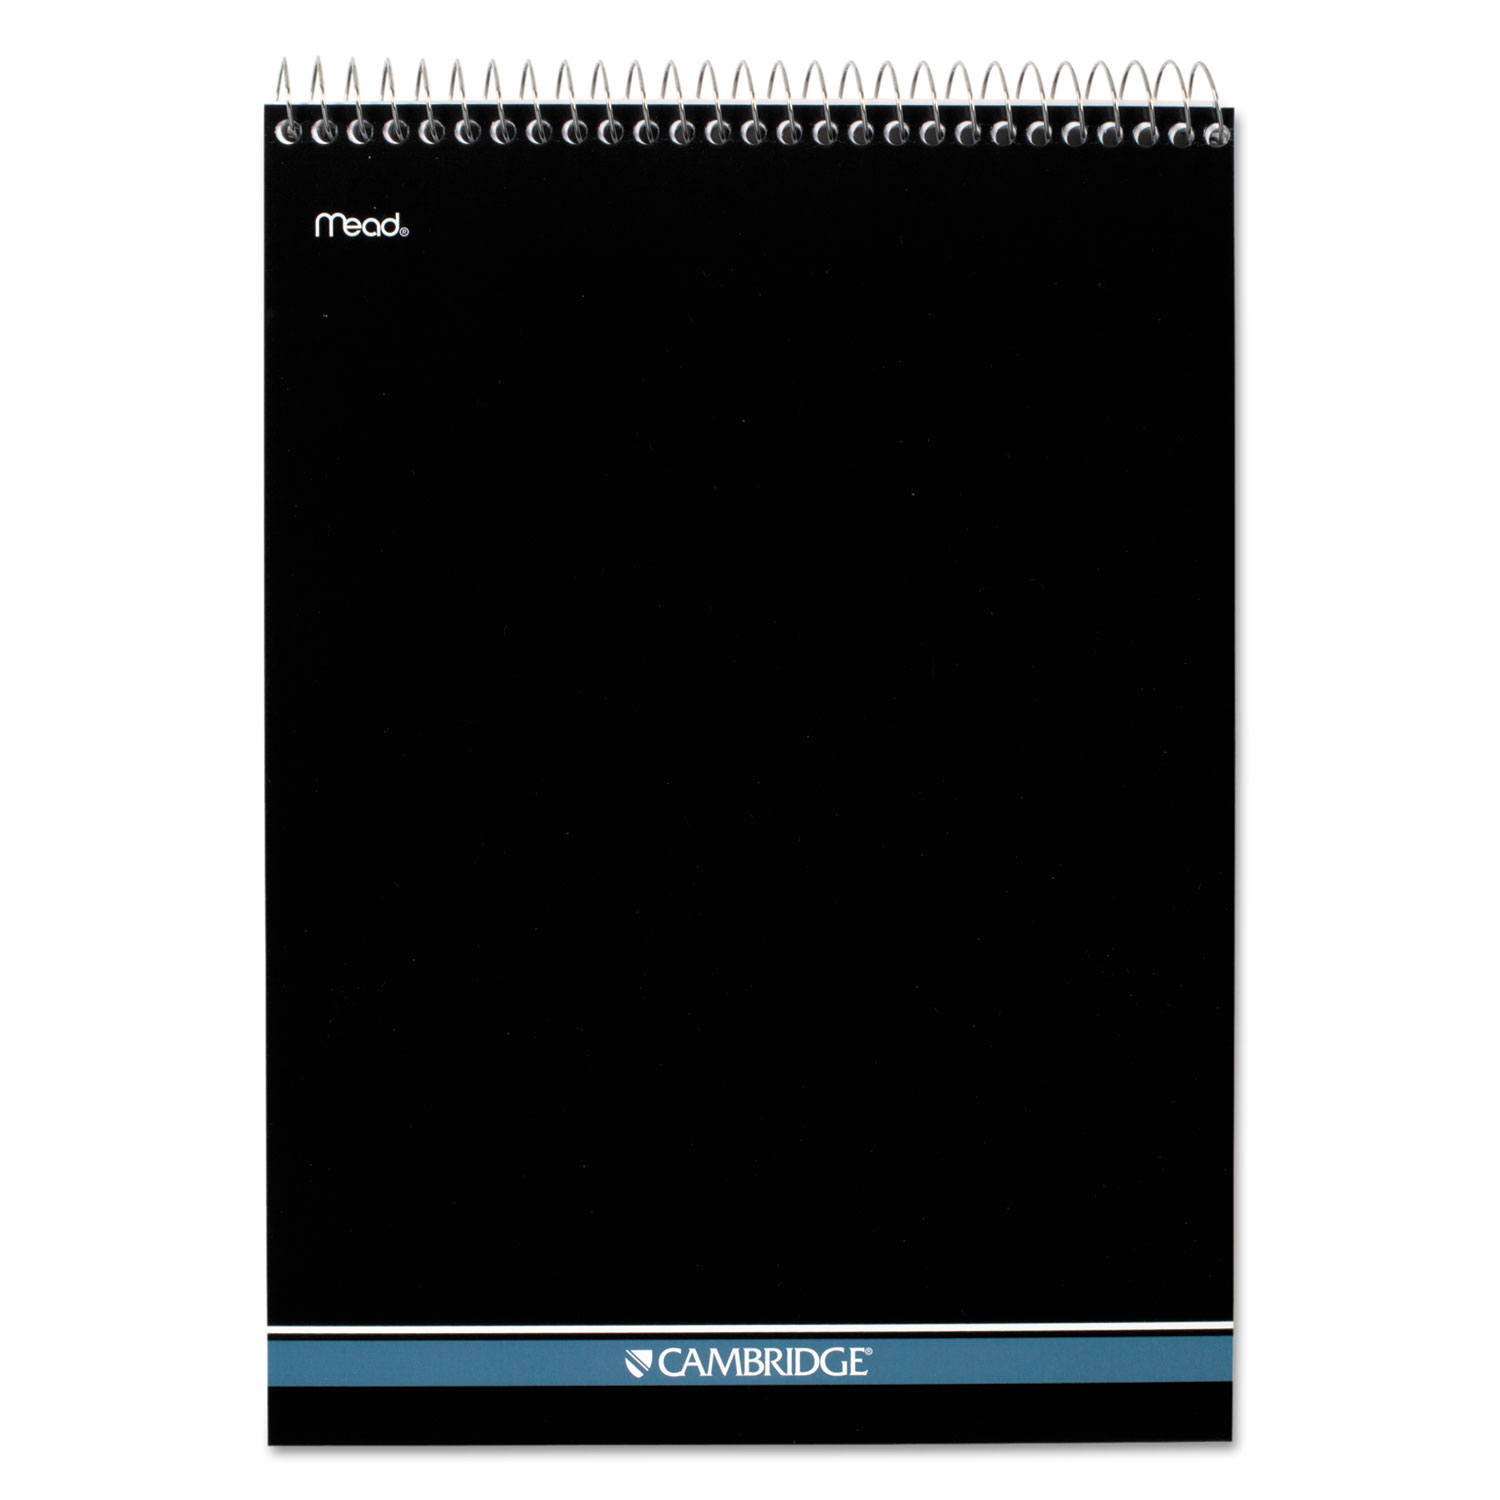  Cambridge 59006 Stiff-Back Wire Bound Notebook, 1 Subject, Wide/Legal Rule, White/Blue Cover, 8.5 x 11.5, 70 Sheets (MEA59006) 